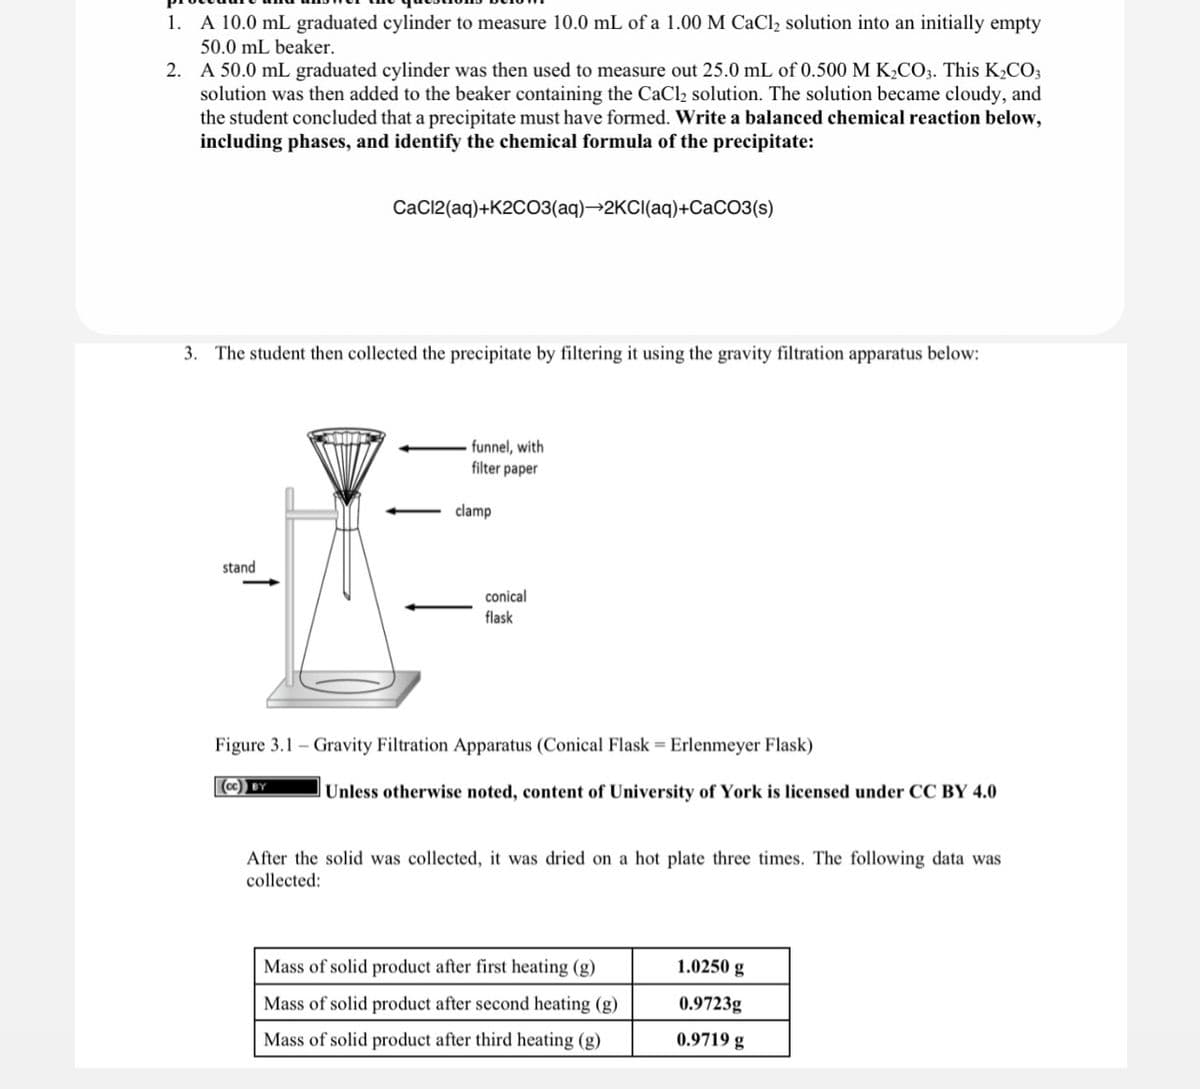 1. A 10.0 mL graduated cylinder to measure 10.0 mL of a 1.00 M CaCl2 solution into an initially empty
50.0 mL beaker.
2. A 50.0 mL graduated cylinder was then used to measure out 25.0 mL of 0.500 M K,CO3. This K2CO3
solution was then added to the beaker containing the CaCl2 solution. The solution became cloudy, and
the student concluded that a precipitate must have formed. Write a balanced chemical reaction below,
including phases, and identify the chemical formula of the precipitate:
CaCl2(aq)+K2CO3(aq)→2KCI(aq)+CaCO3(s)
3. The student then collected the precipitate by filtering it using the gravity filtration apparatus below:
funnel, with
filter paper
clamp
stand
conical
flask
Figure 3.1 - Gravity Filtration Apparatus (Conical Flask = Erlenmeyer Flask)
c BY
Unless otherwise noted, content of University of York is licensed under CC BY 4.0
After the solid was collected, it was dried on a hot plate three times. The following data was
collected:
Mass of solid product after first heating (g)
1.0250 g
Mass of solid product after second heating (g)
0.9723g
Mass of solid product after third heating (g)
0.9719 g
